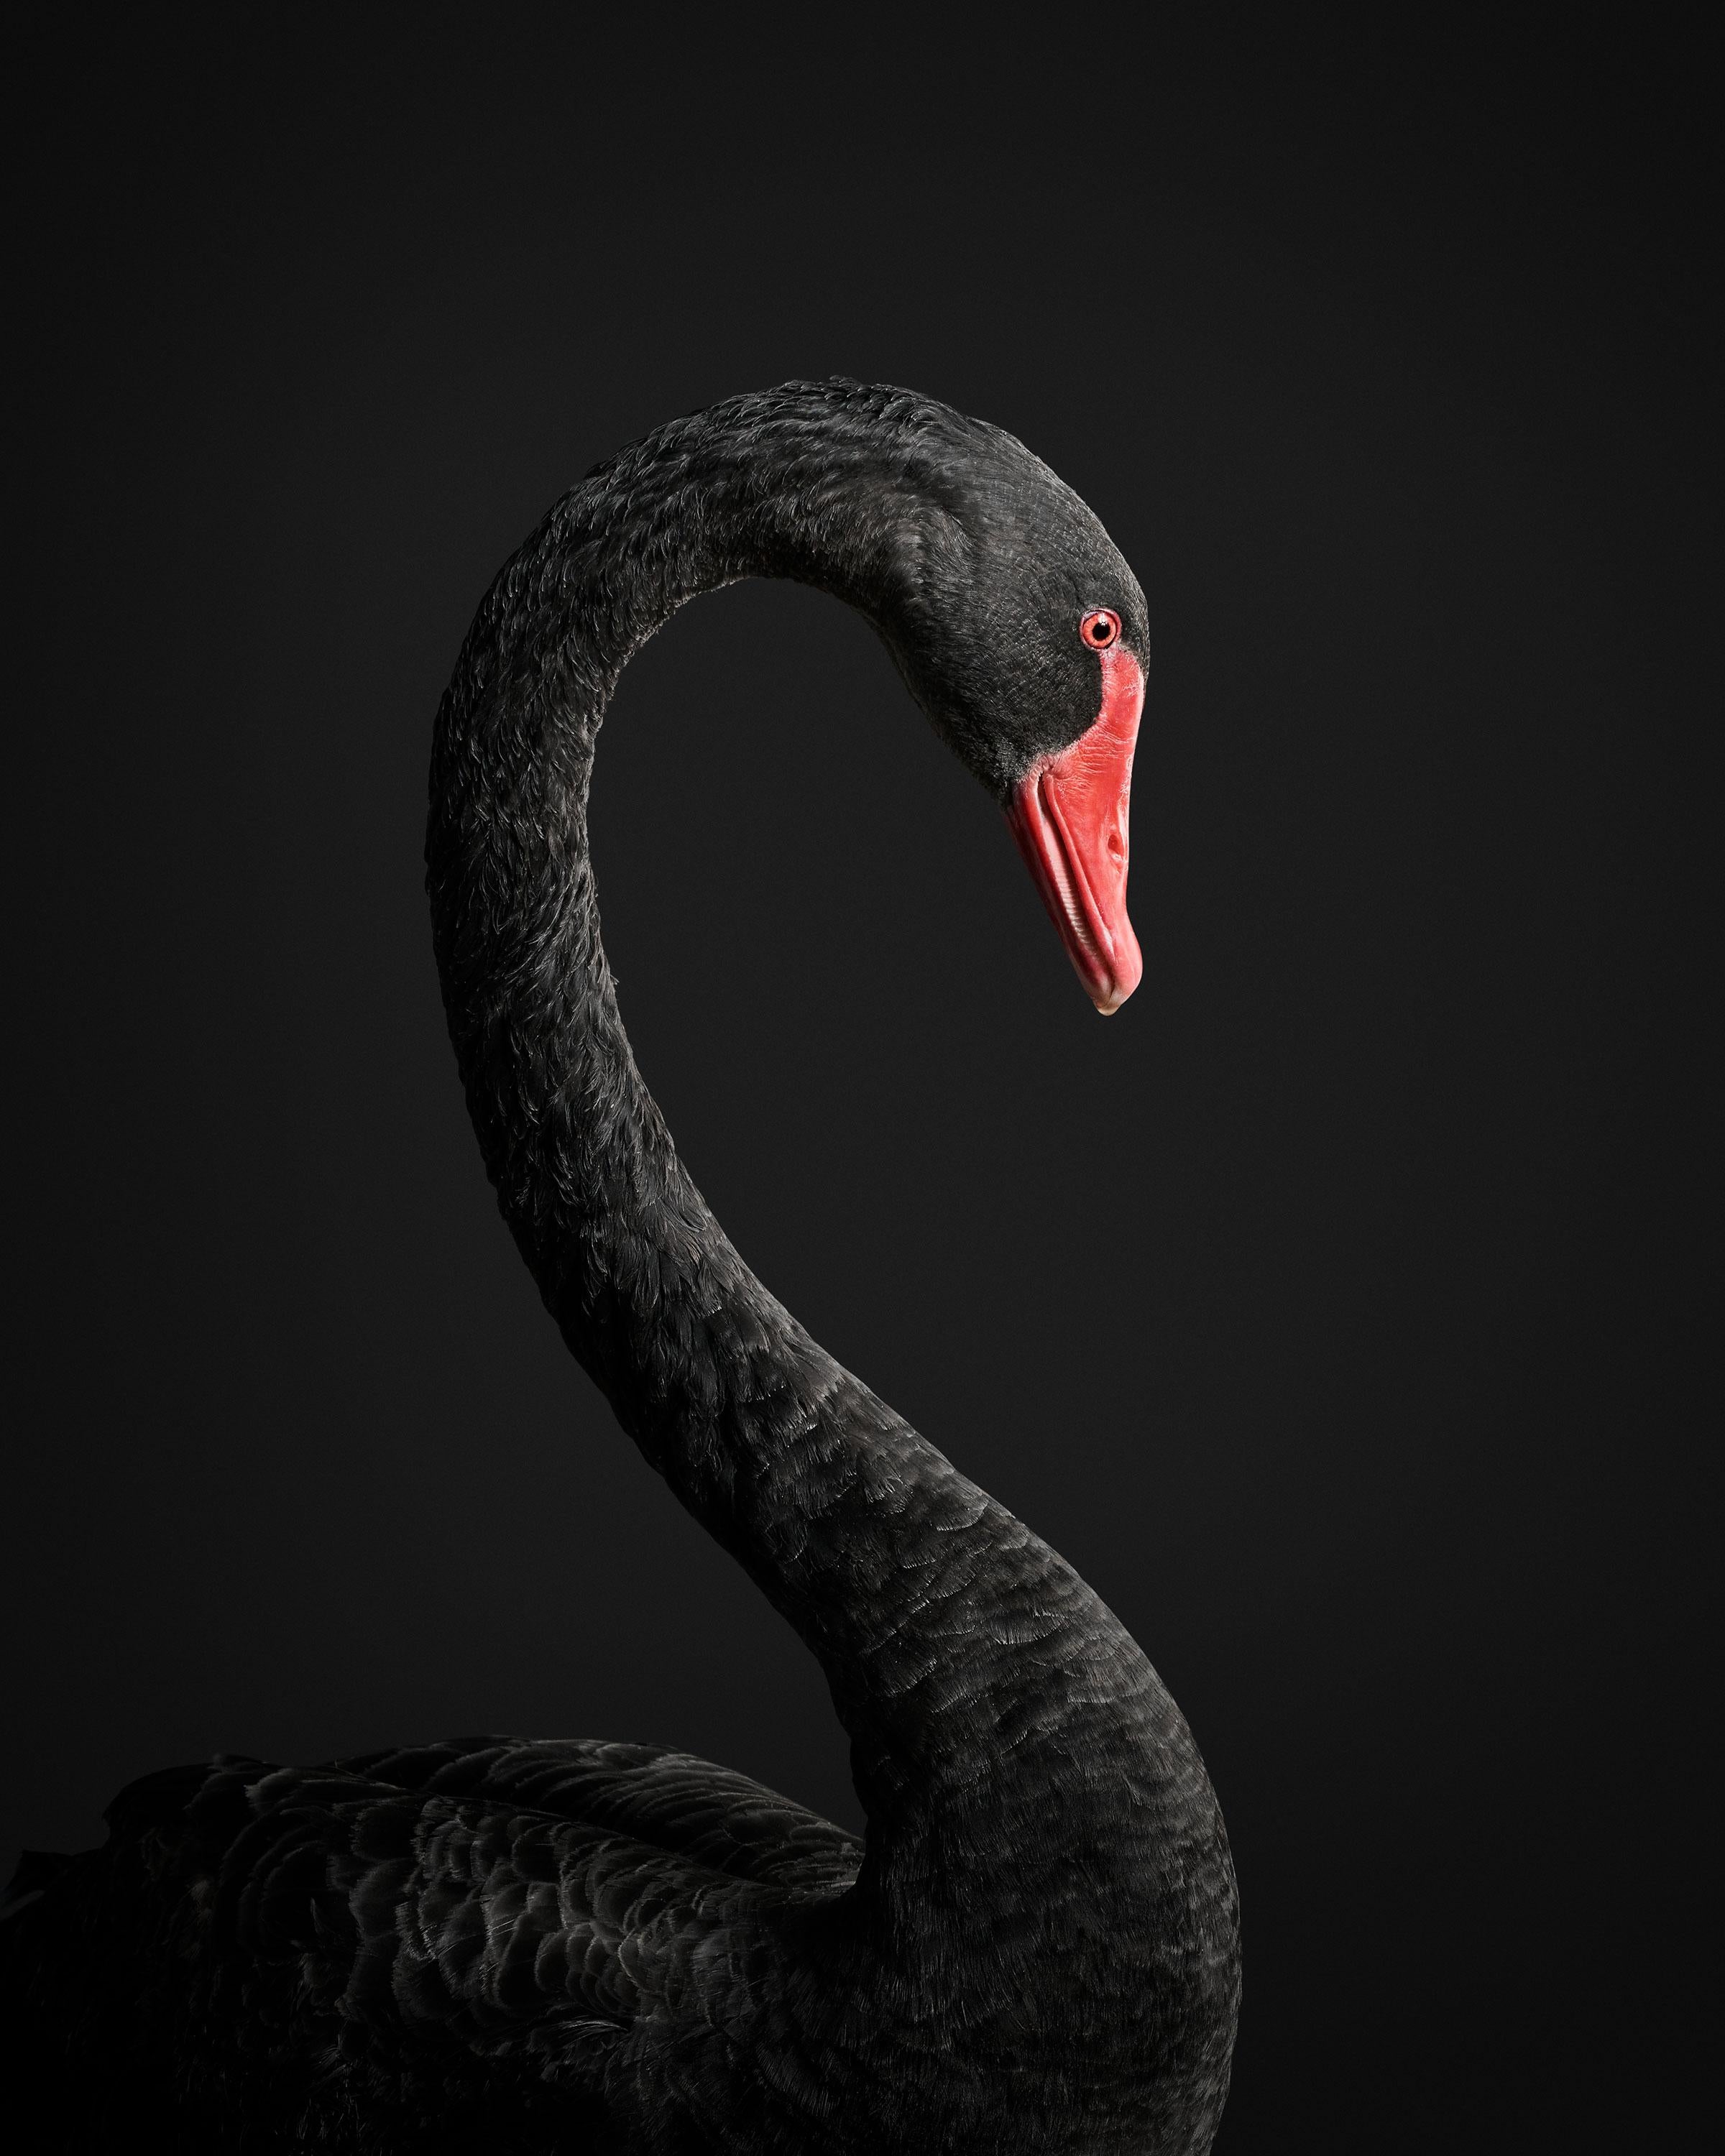 Randal Ford - Black Swan No. 1, Photography 2018, Printed After